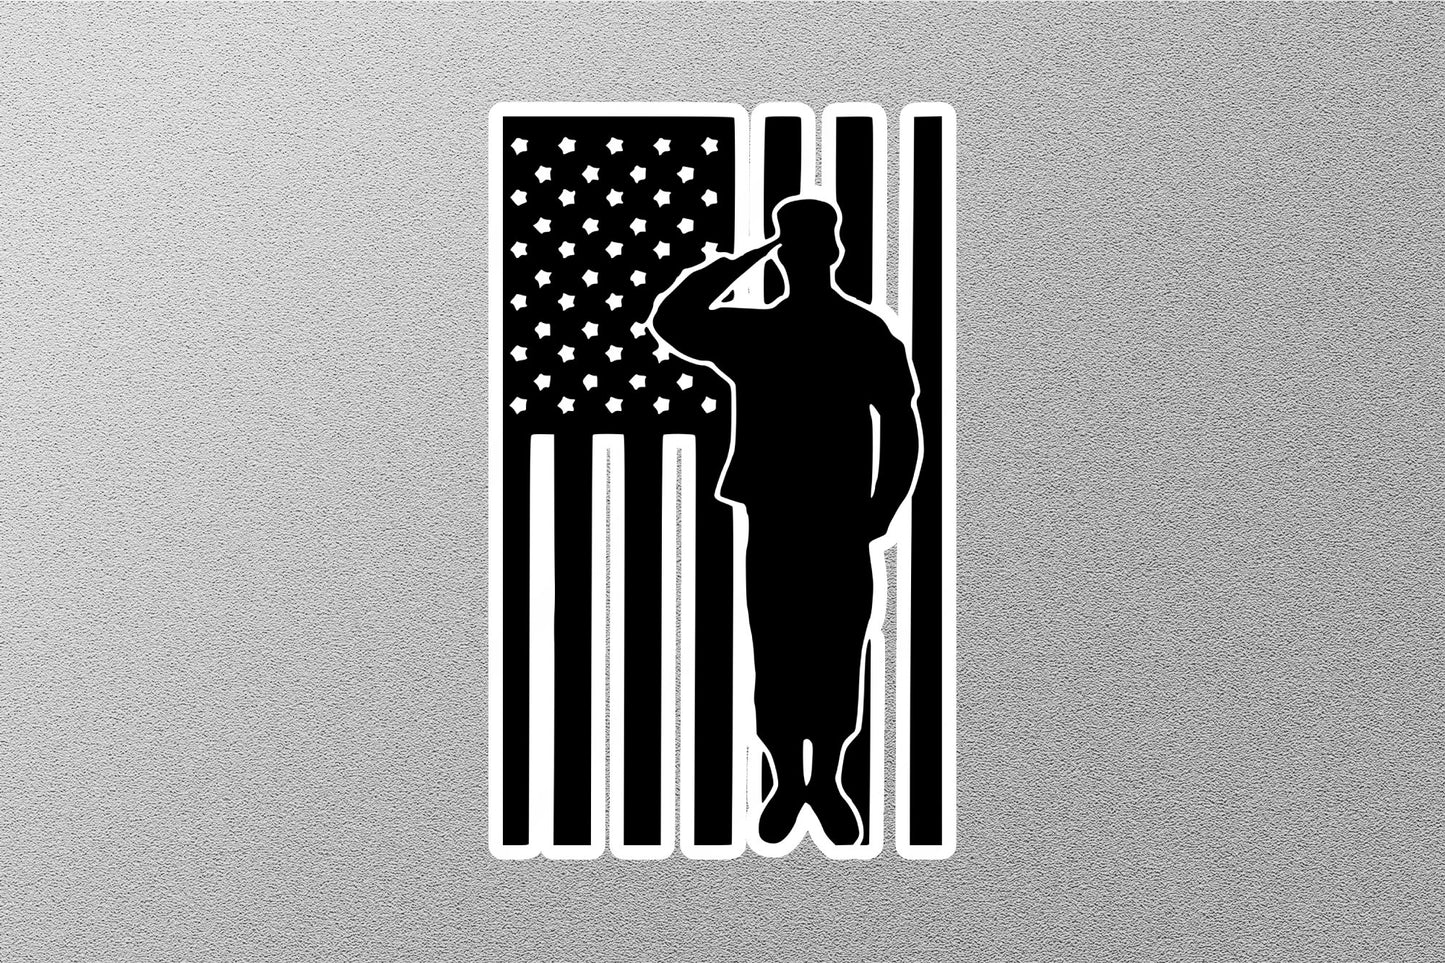 Soldier Salute to USA Flag Sticker